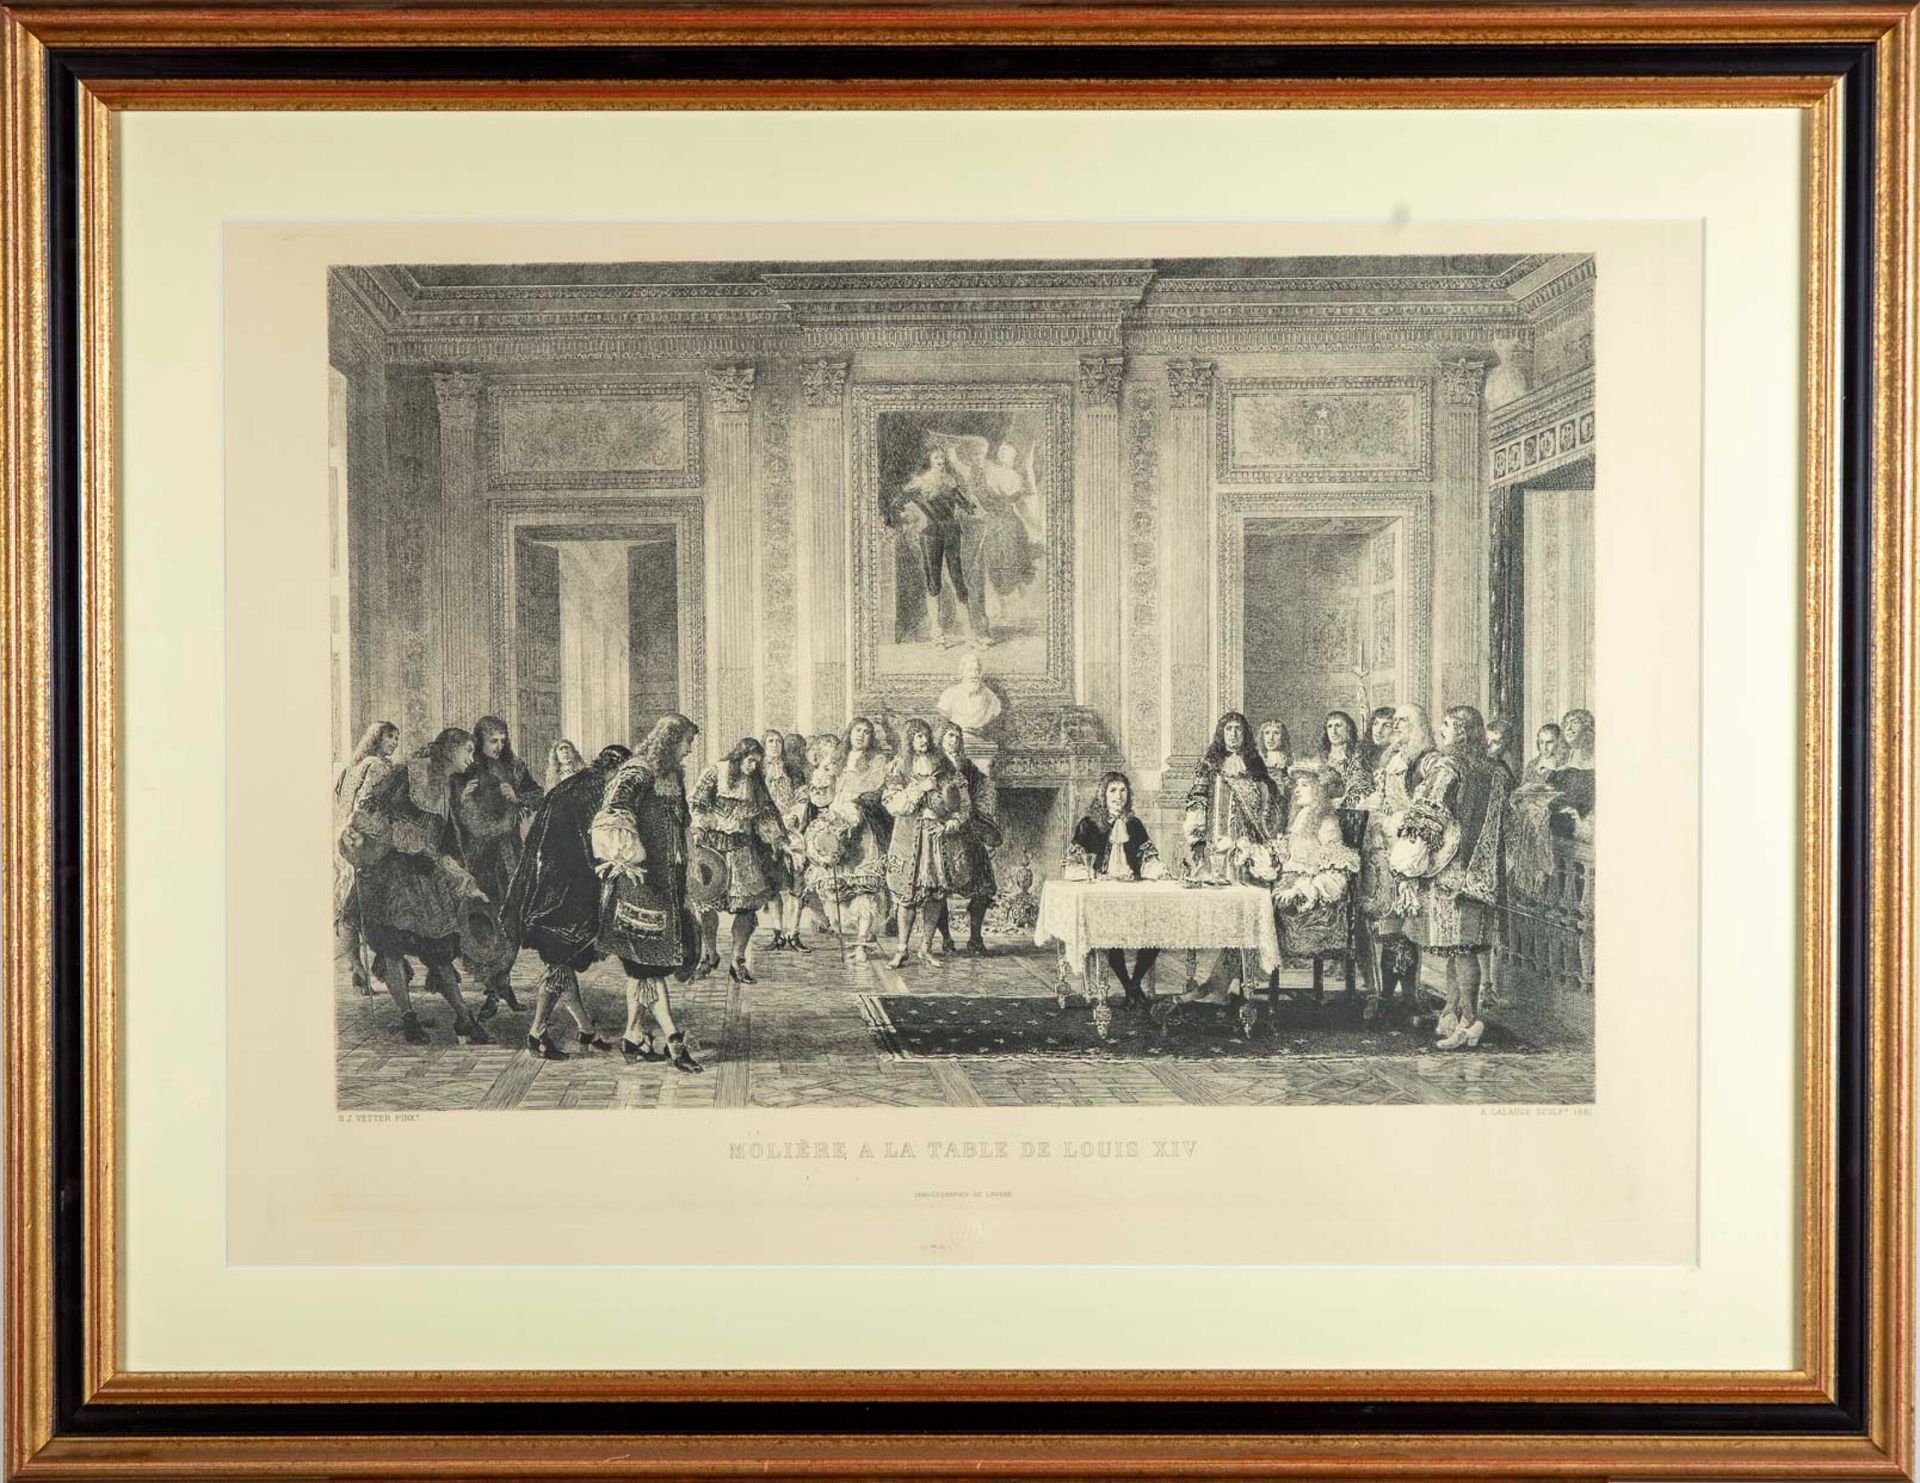 VETTER After H. J. VETTER, engraved by A . LALAUZE 

Molière at the table of Lou&hellip;